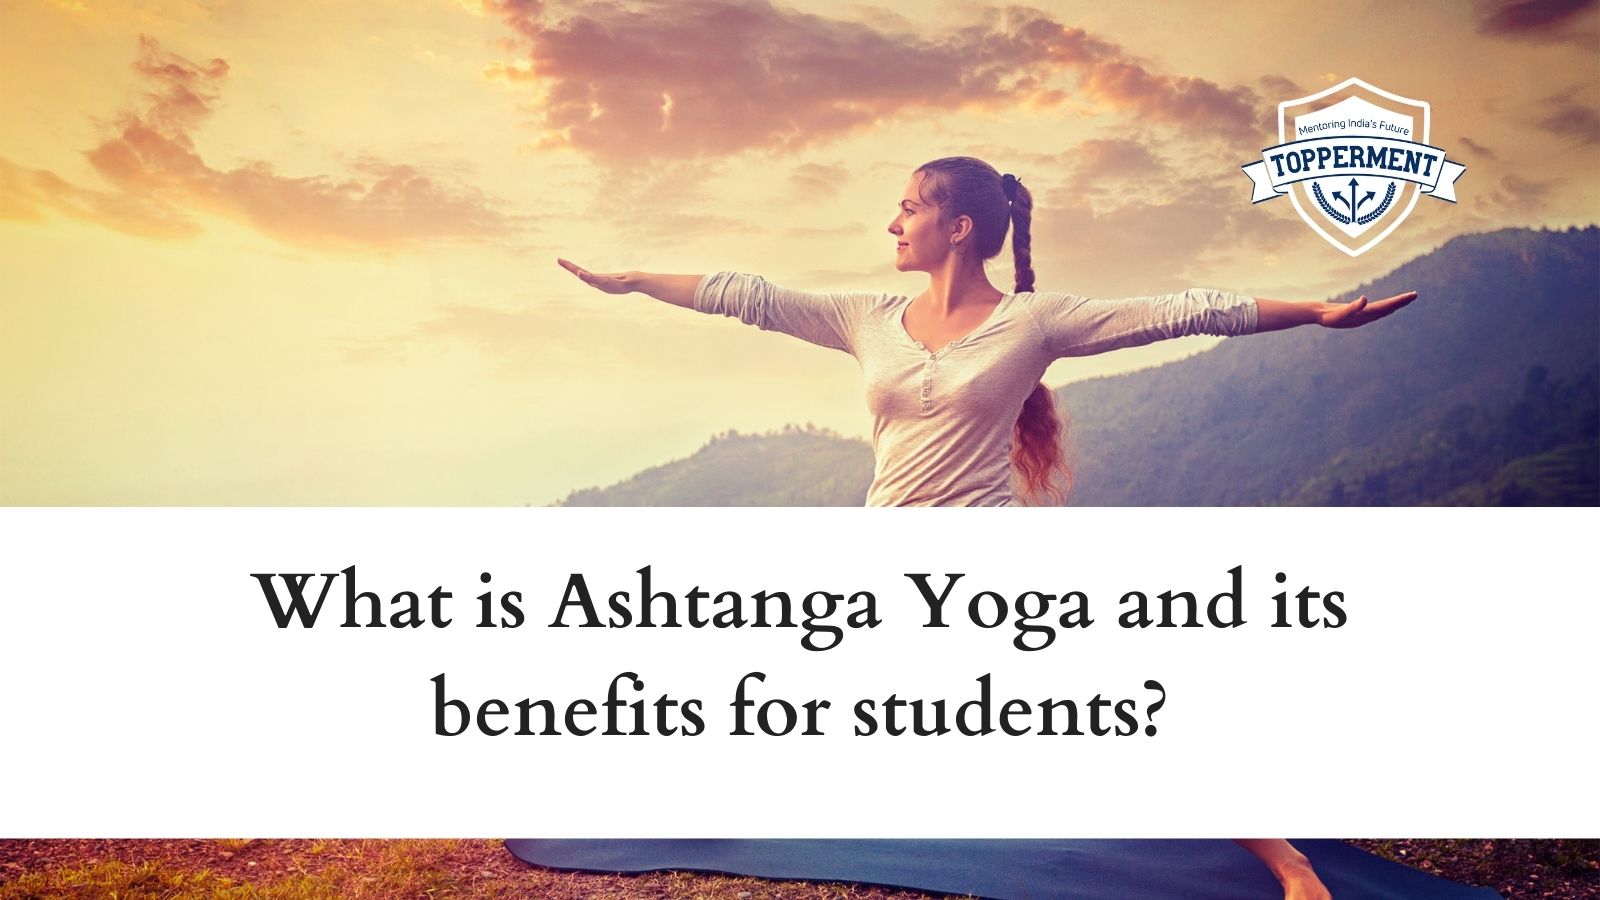 What-is-Ashtanga-Yoga-and-its-benefits-for-students-Best-UPSC-IAS-Coaching-For-Mentorship-And-Guidance